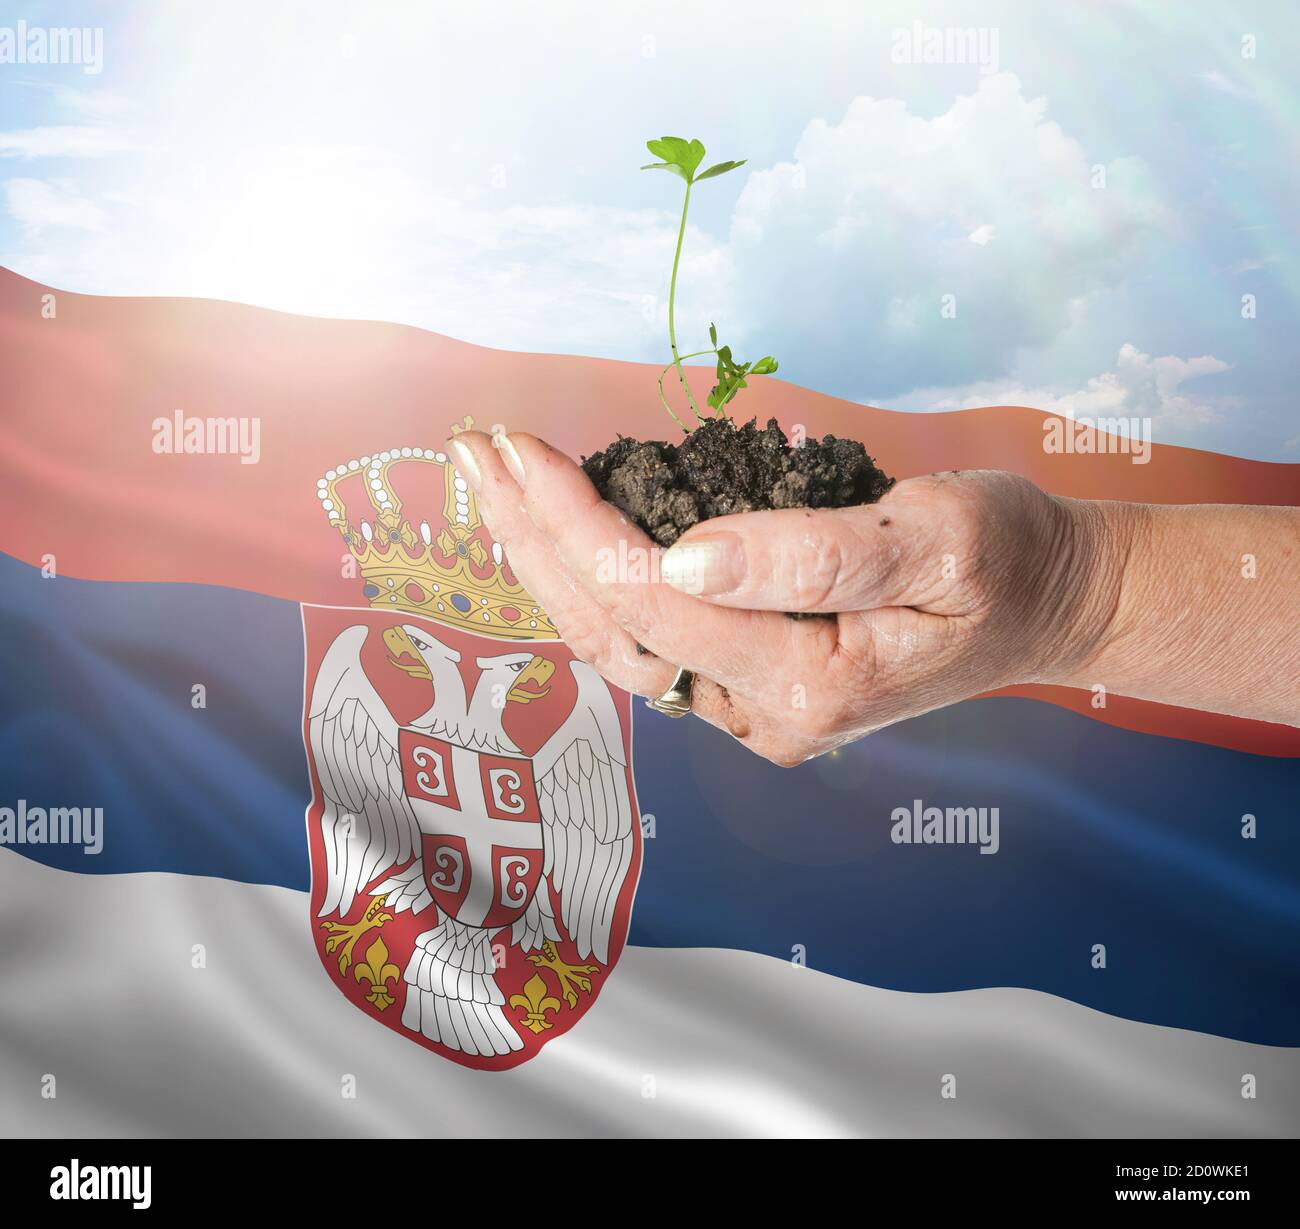 Serbia growth and new beginning. Green renewable energy and ecology concept. Hand holding young plant. Stock Photo